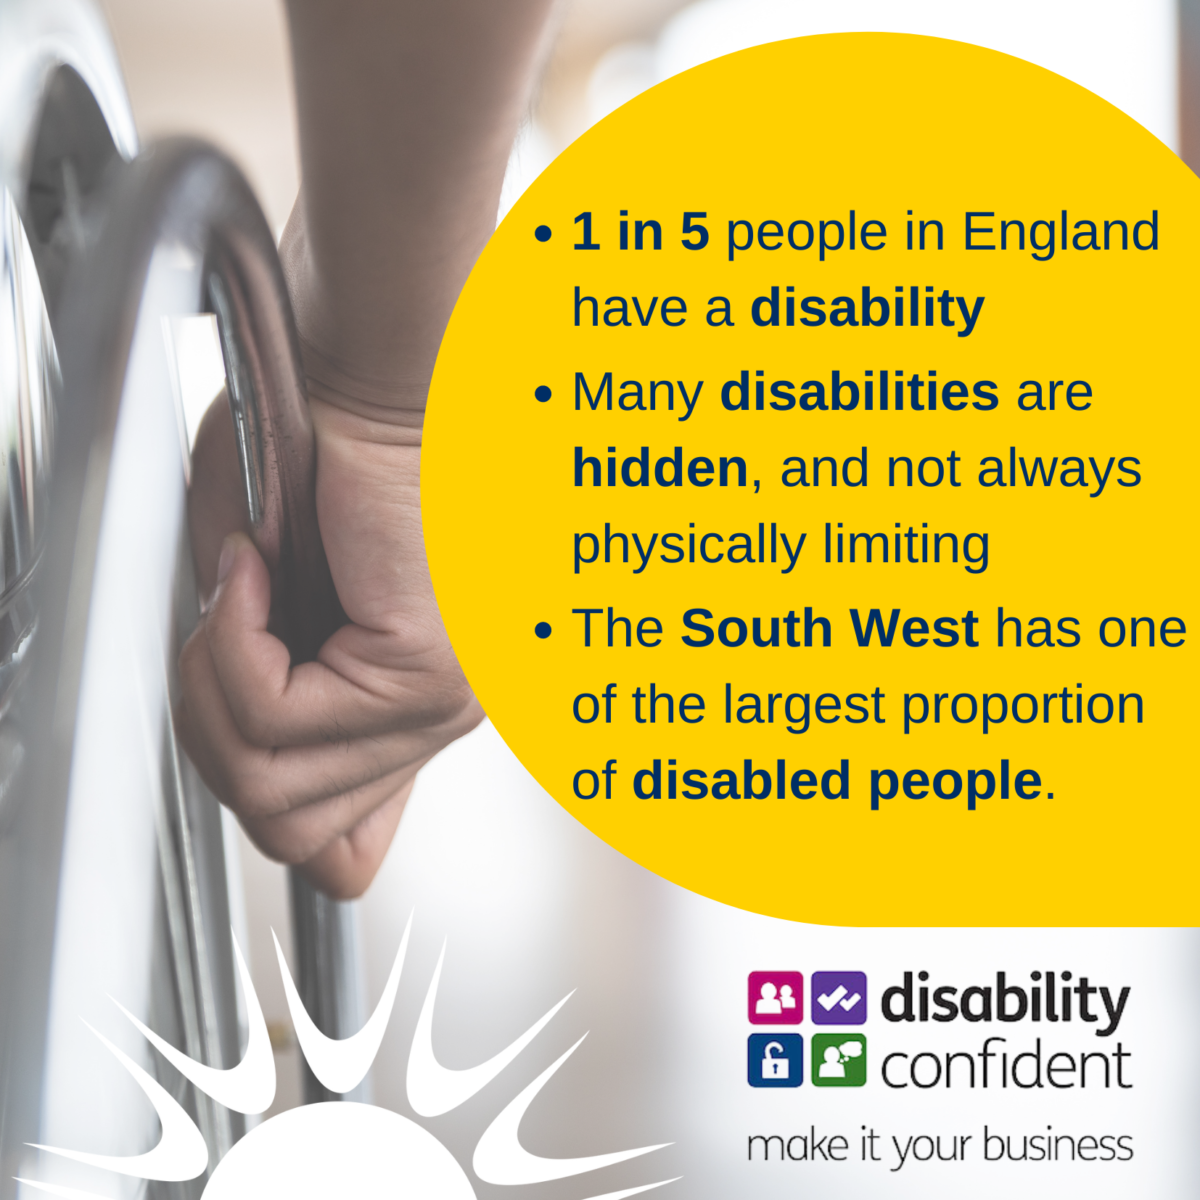 Info graphic showing wheelchair and the disability confident make it your business logo. 1 in 5 people in England have a disability, not every disability is physcially limiting, some disabilities are hidden. The south west has one of the highest proportion of disabled people